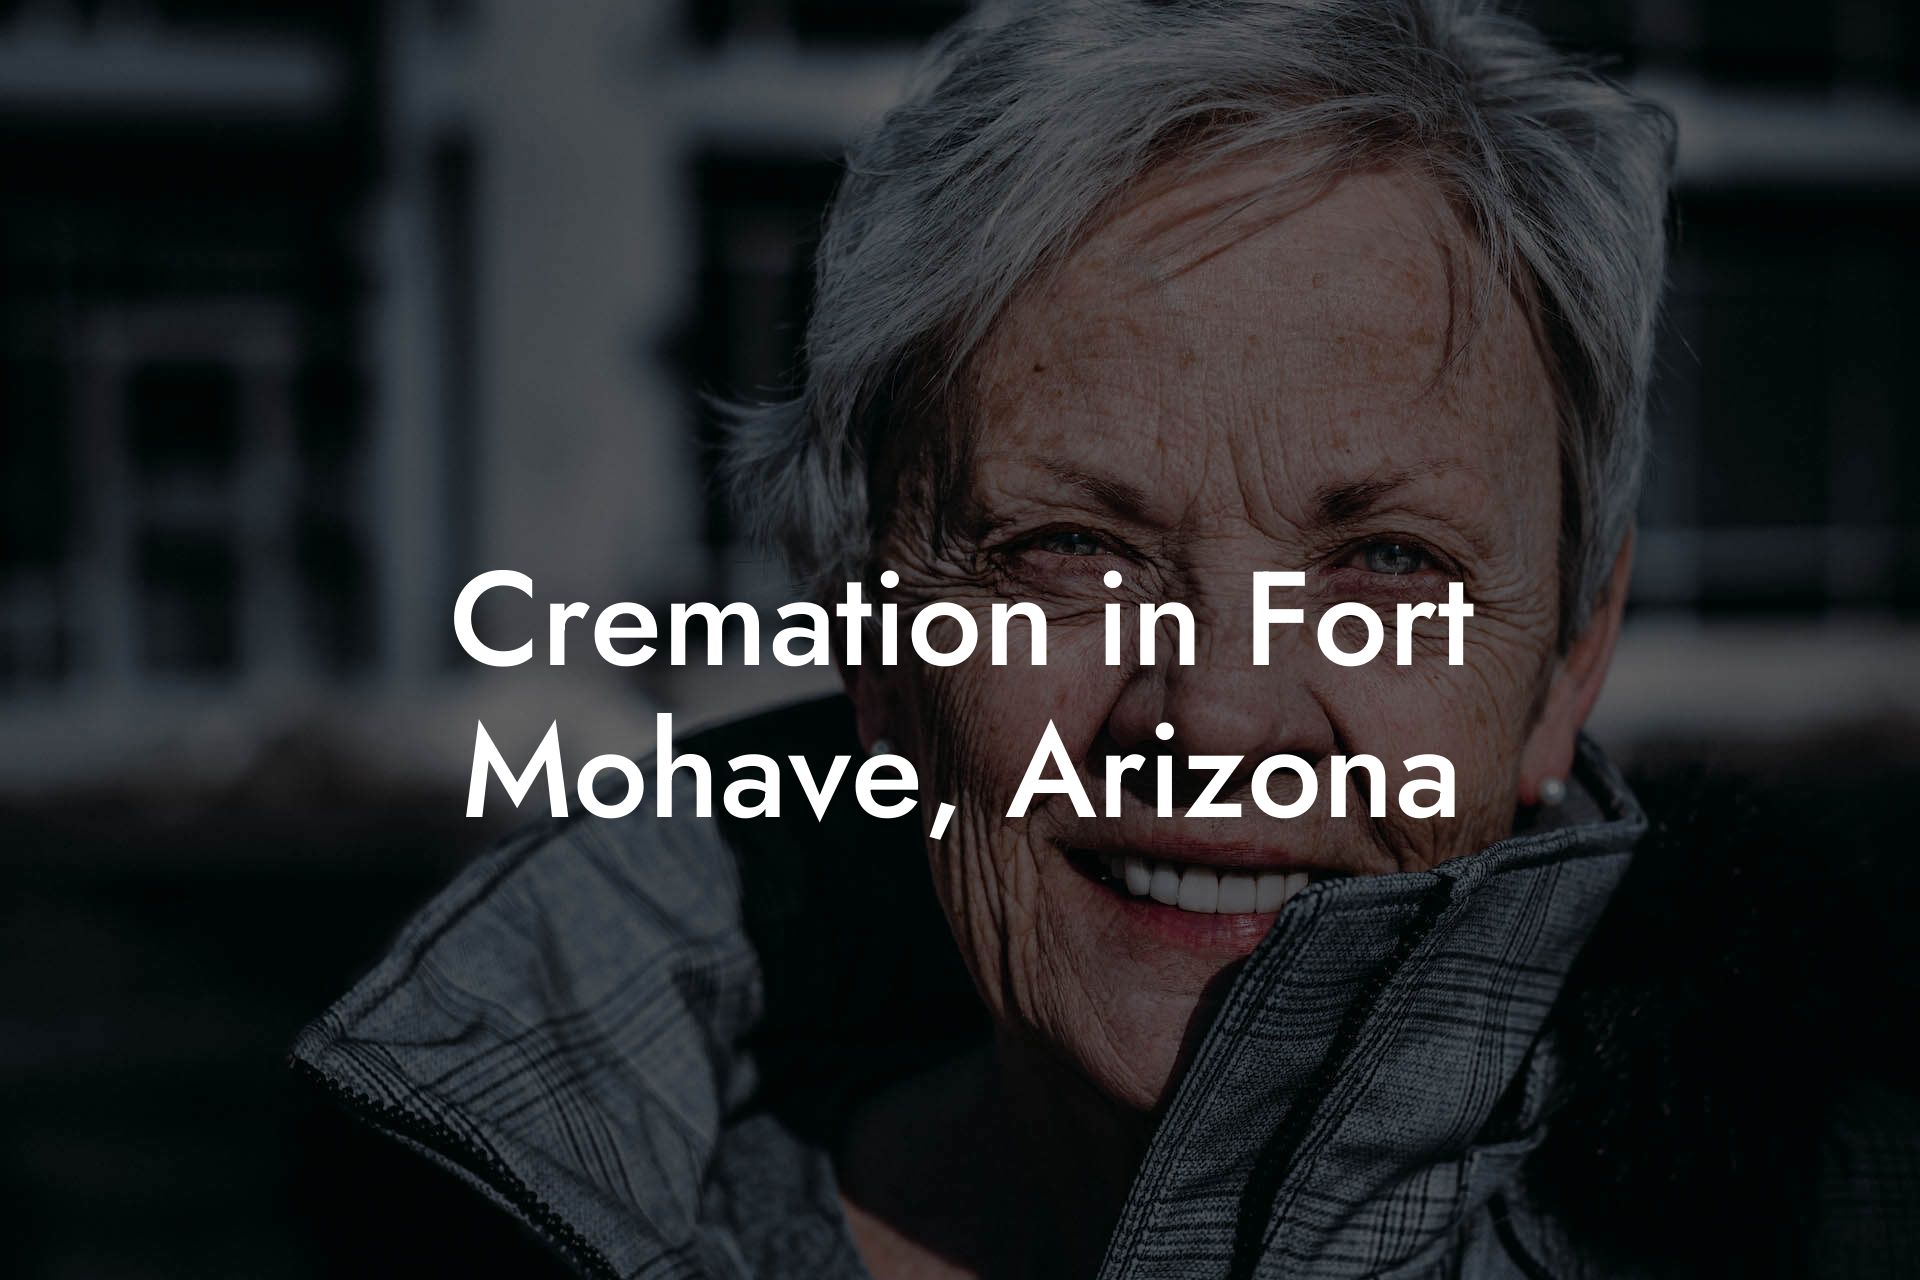 Cremation in Fort Mohave, Arizona